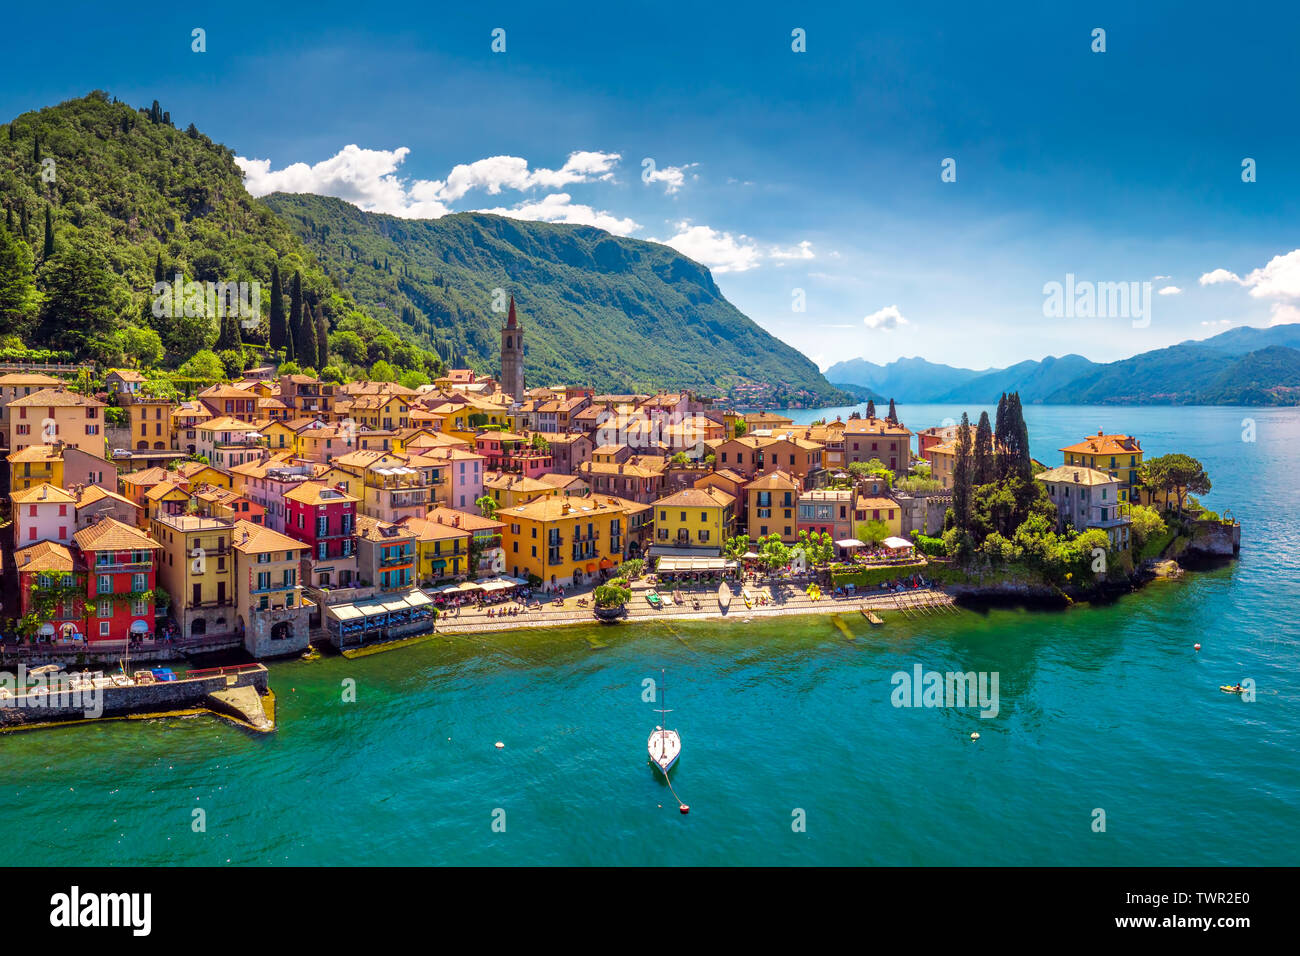 Aerial view of Varena old town on Lake Como with the mountains in the background, Italy, Europe. Stock Photo